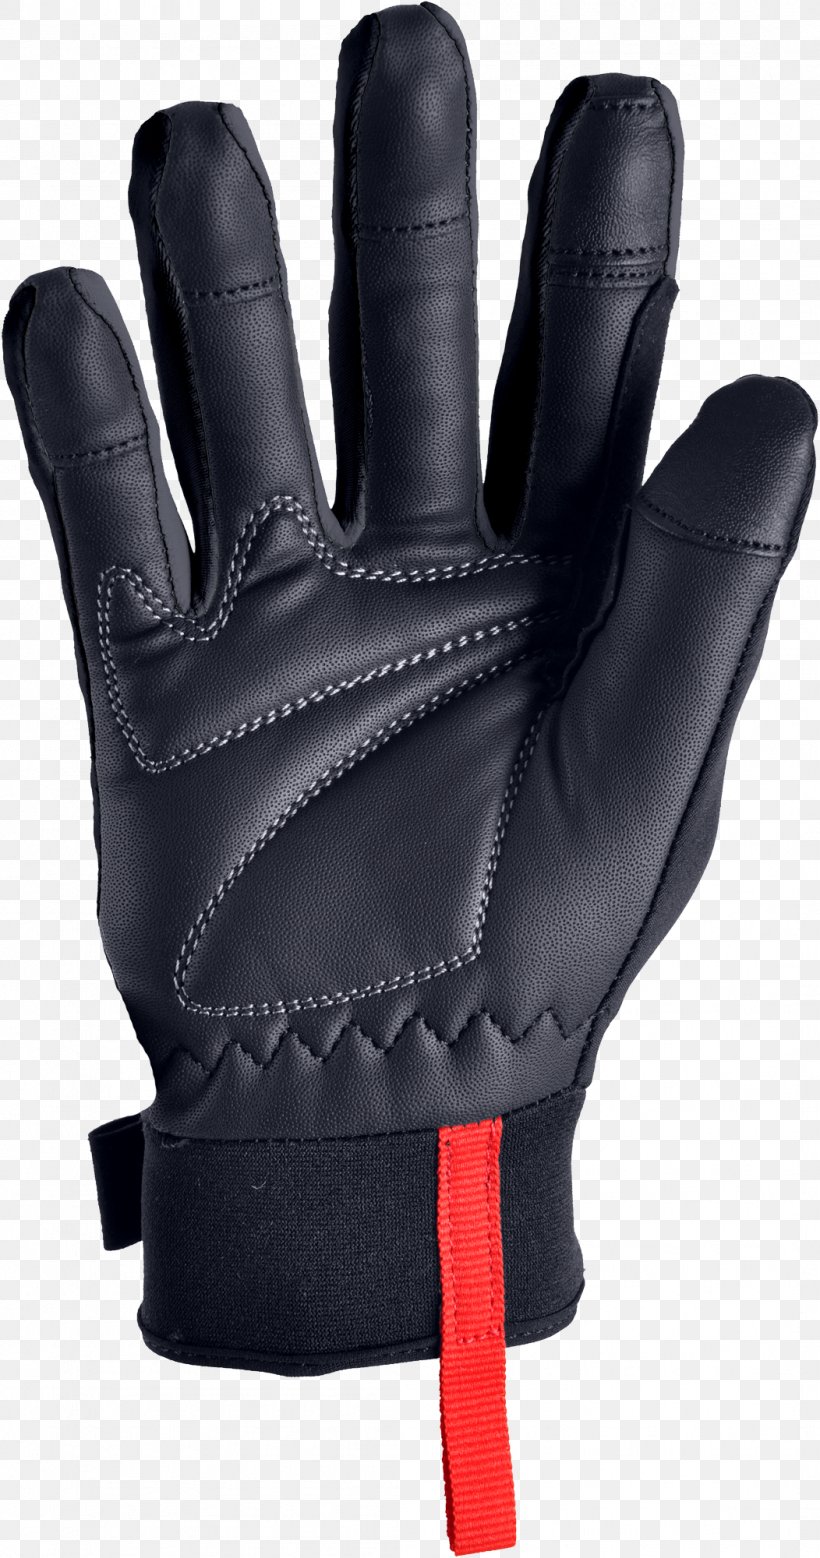 Lacrosse Glove Cycling Glove, PNG, 1052x2000px, Lacrosse Glove, Baseball, Baseball Protective Gear, Bicycle Glove, Cycling Glove Download Free